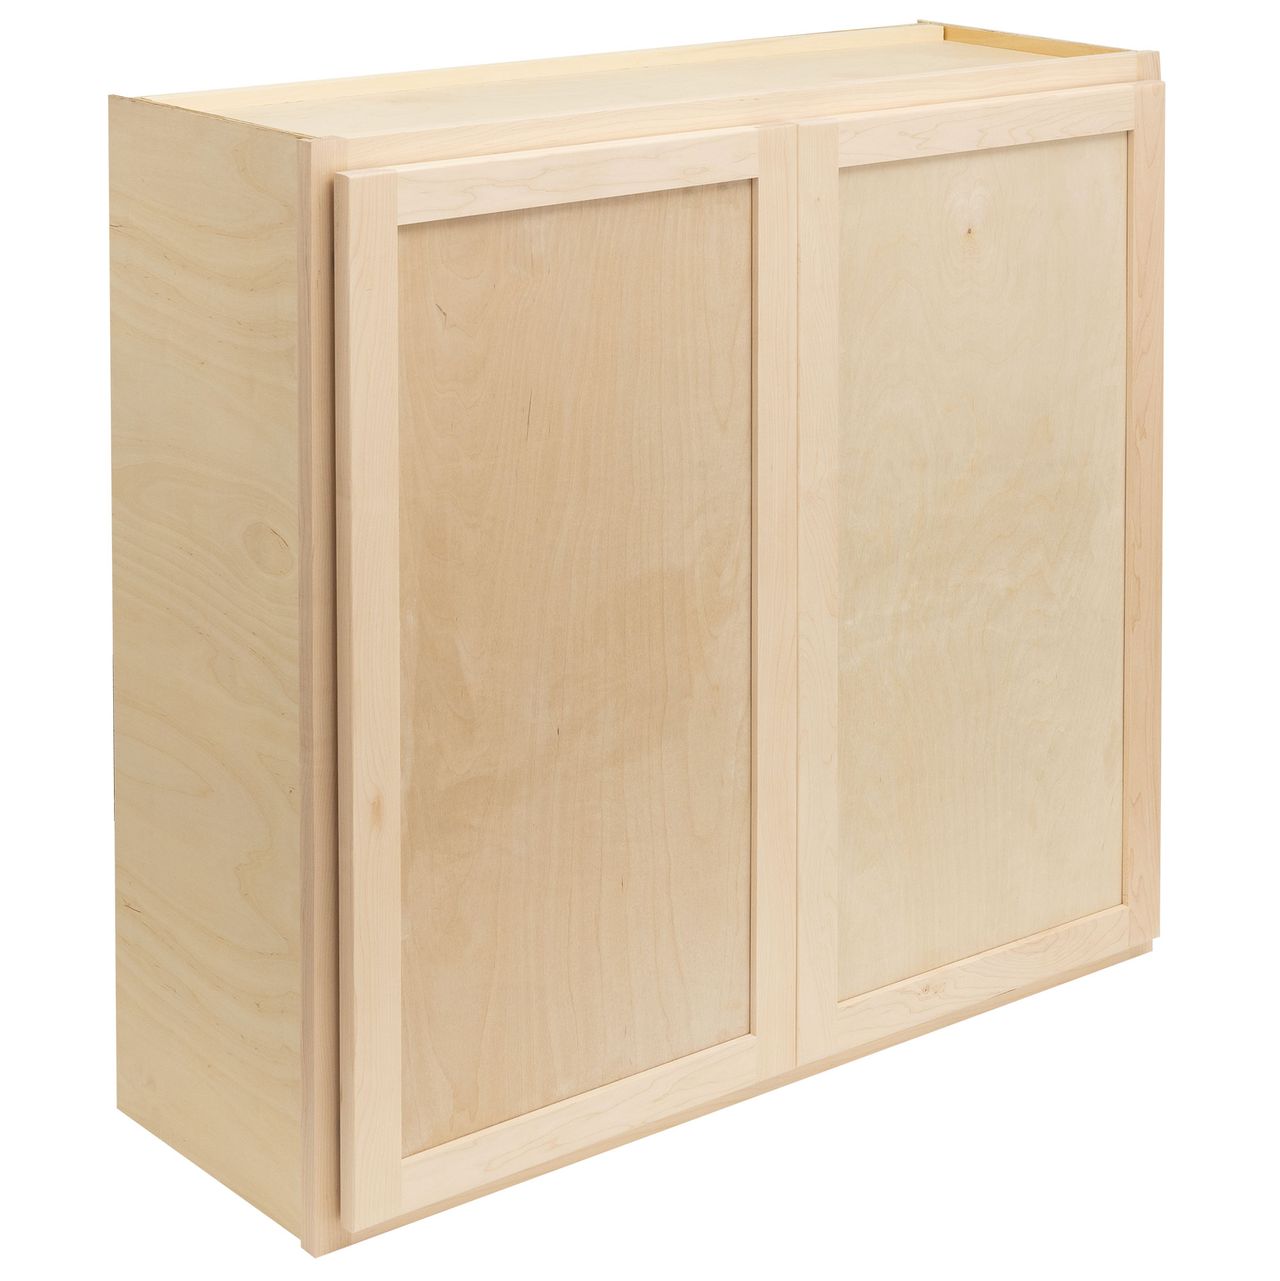 Quicklock RTA (Ready-to-Assemble) Raw Maple Wall Cabinet- Large 30"H x (27", 30", 33", 36"W)